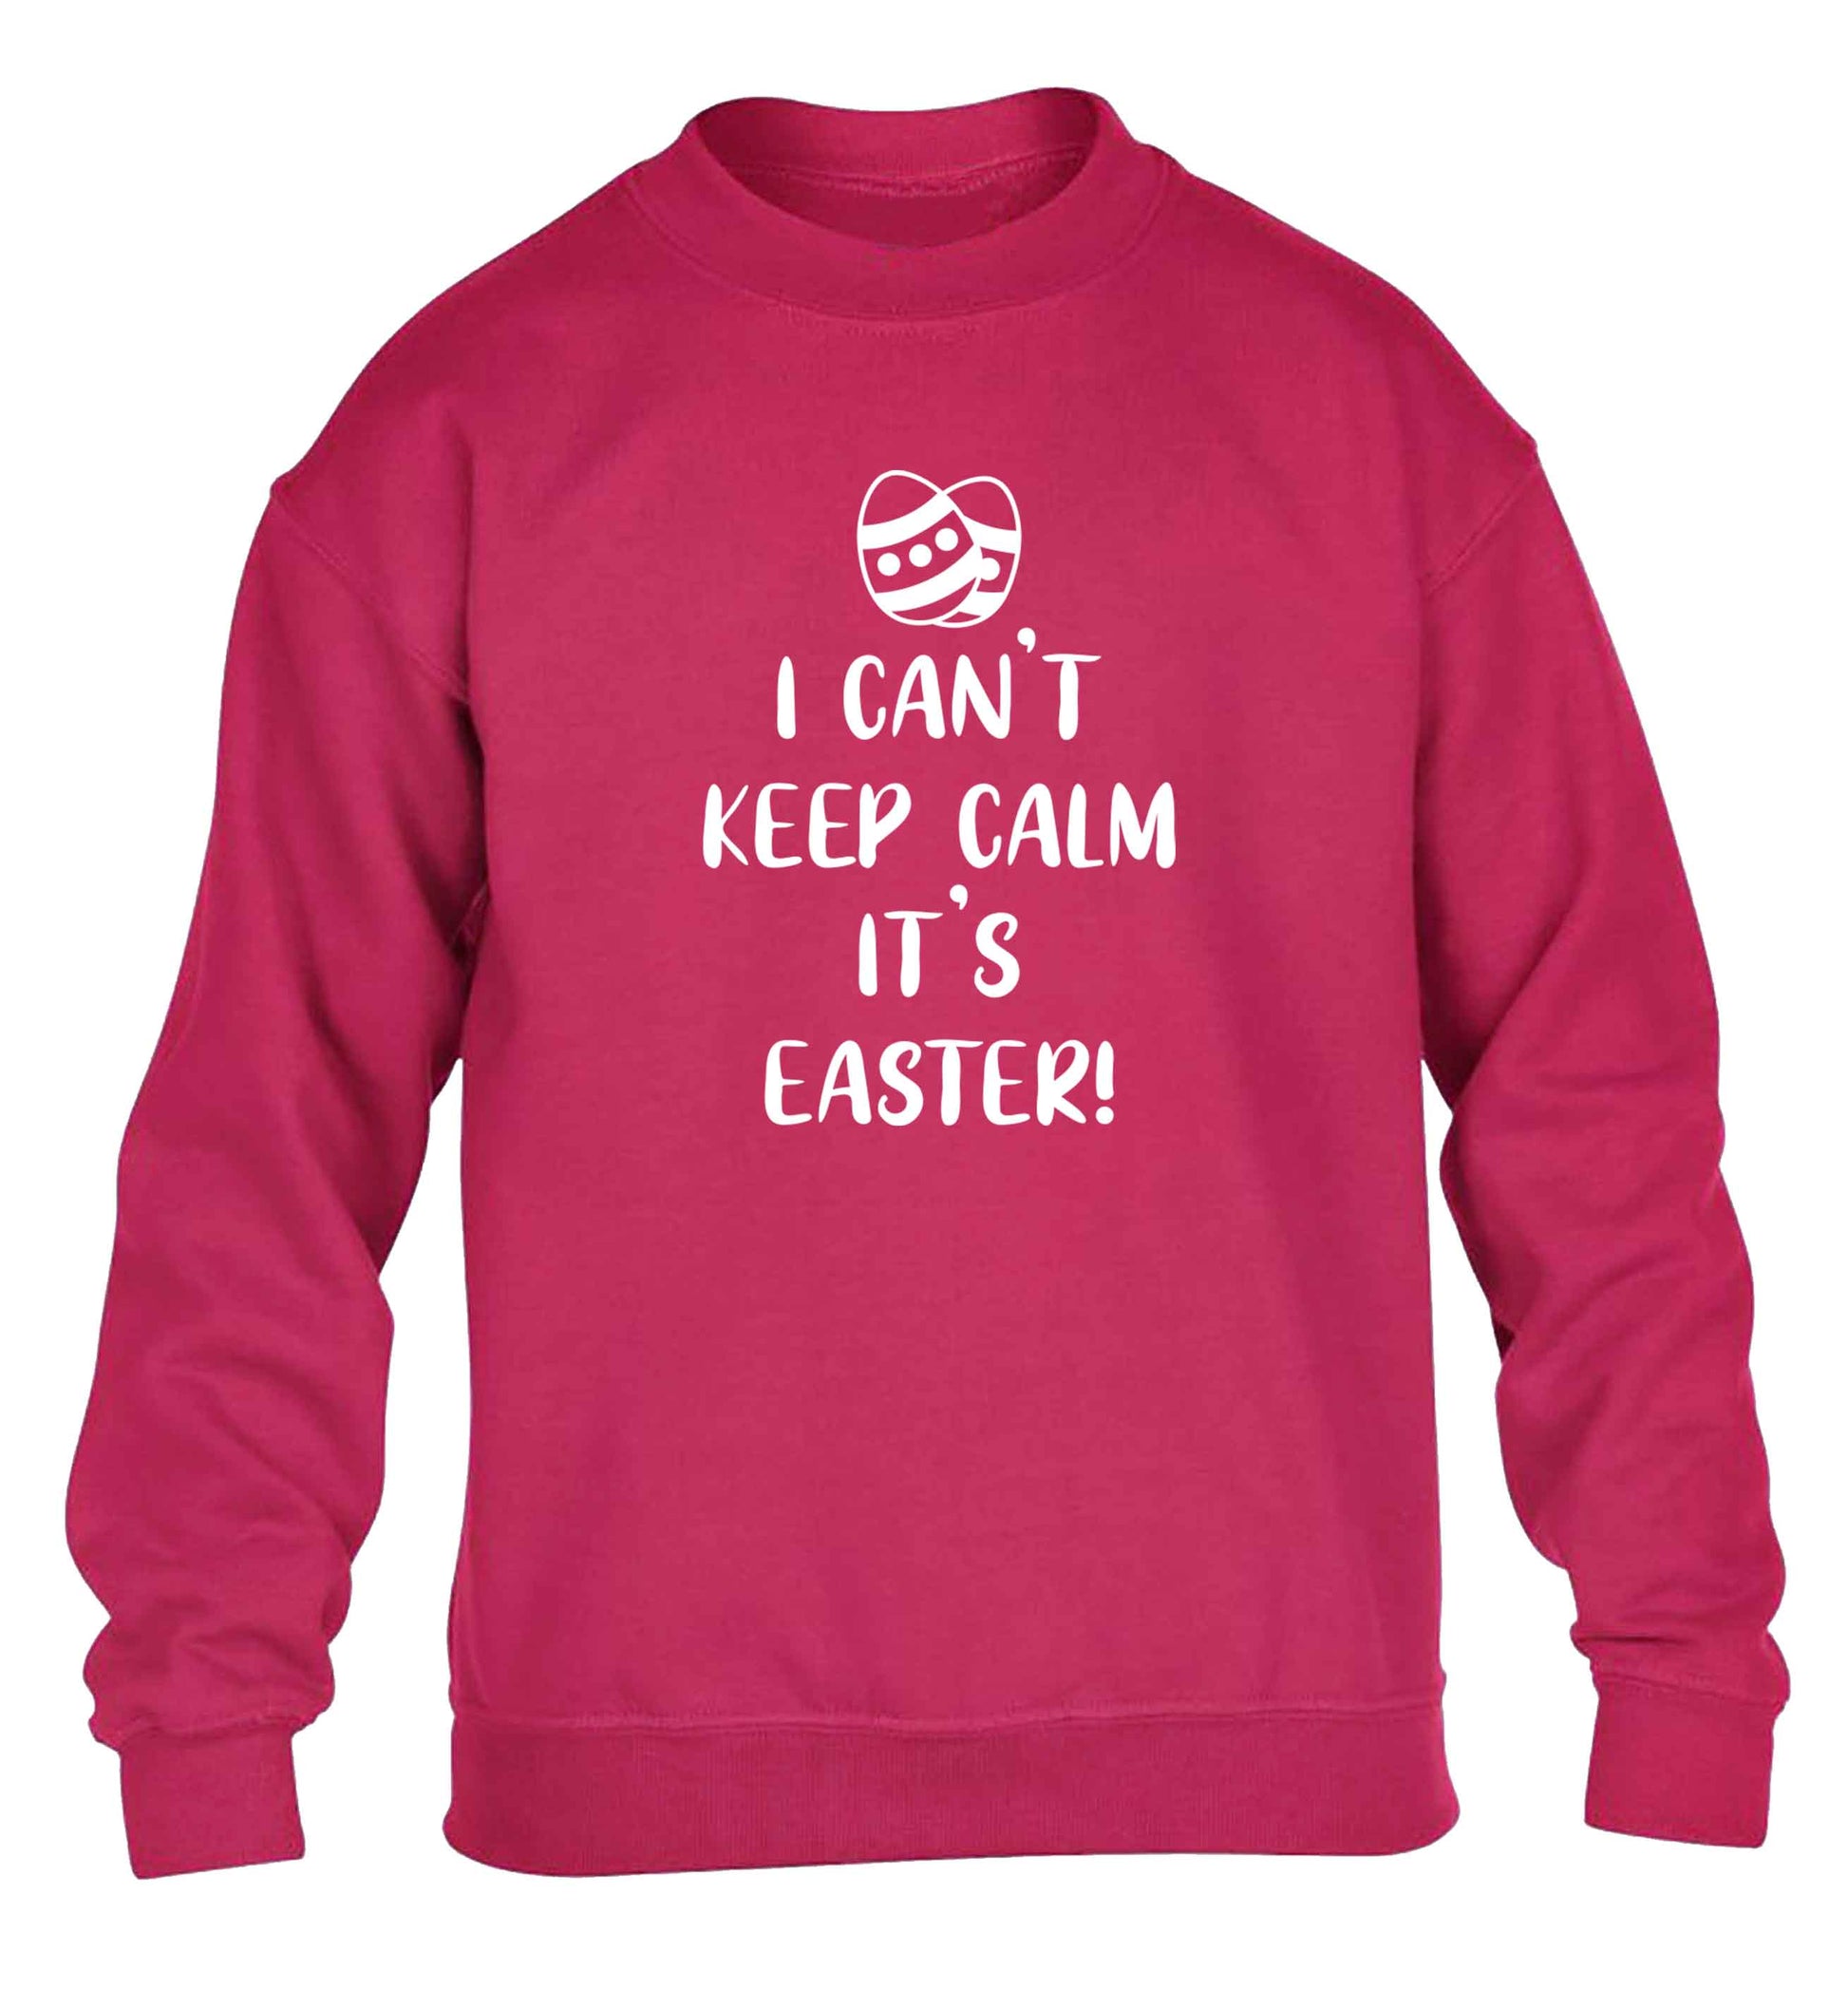 I can't keep calm it's Easter children's pink sweater 12-13 Years